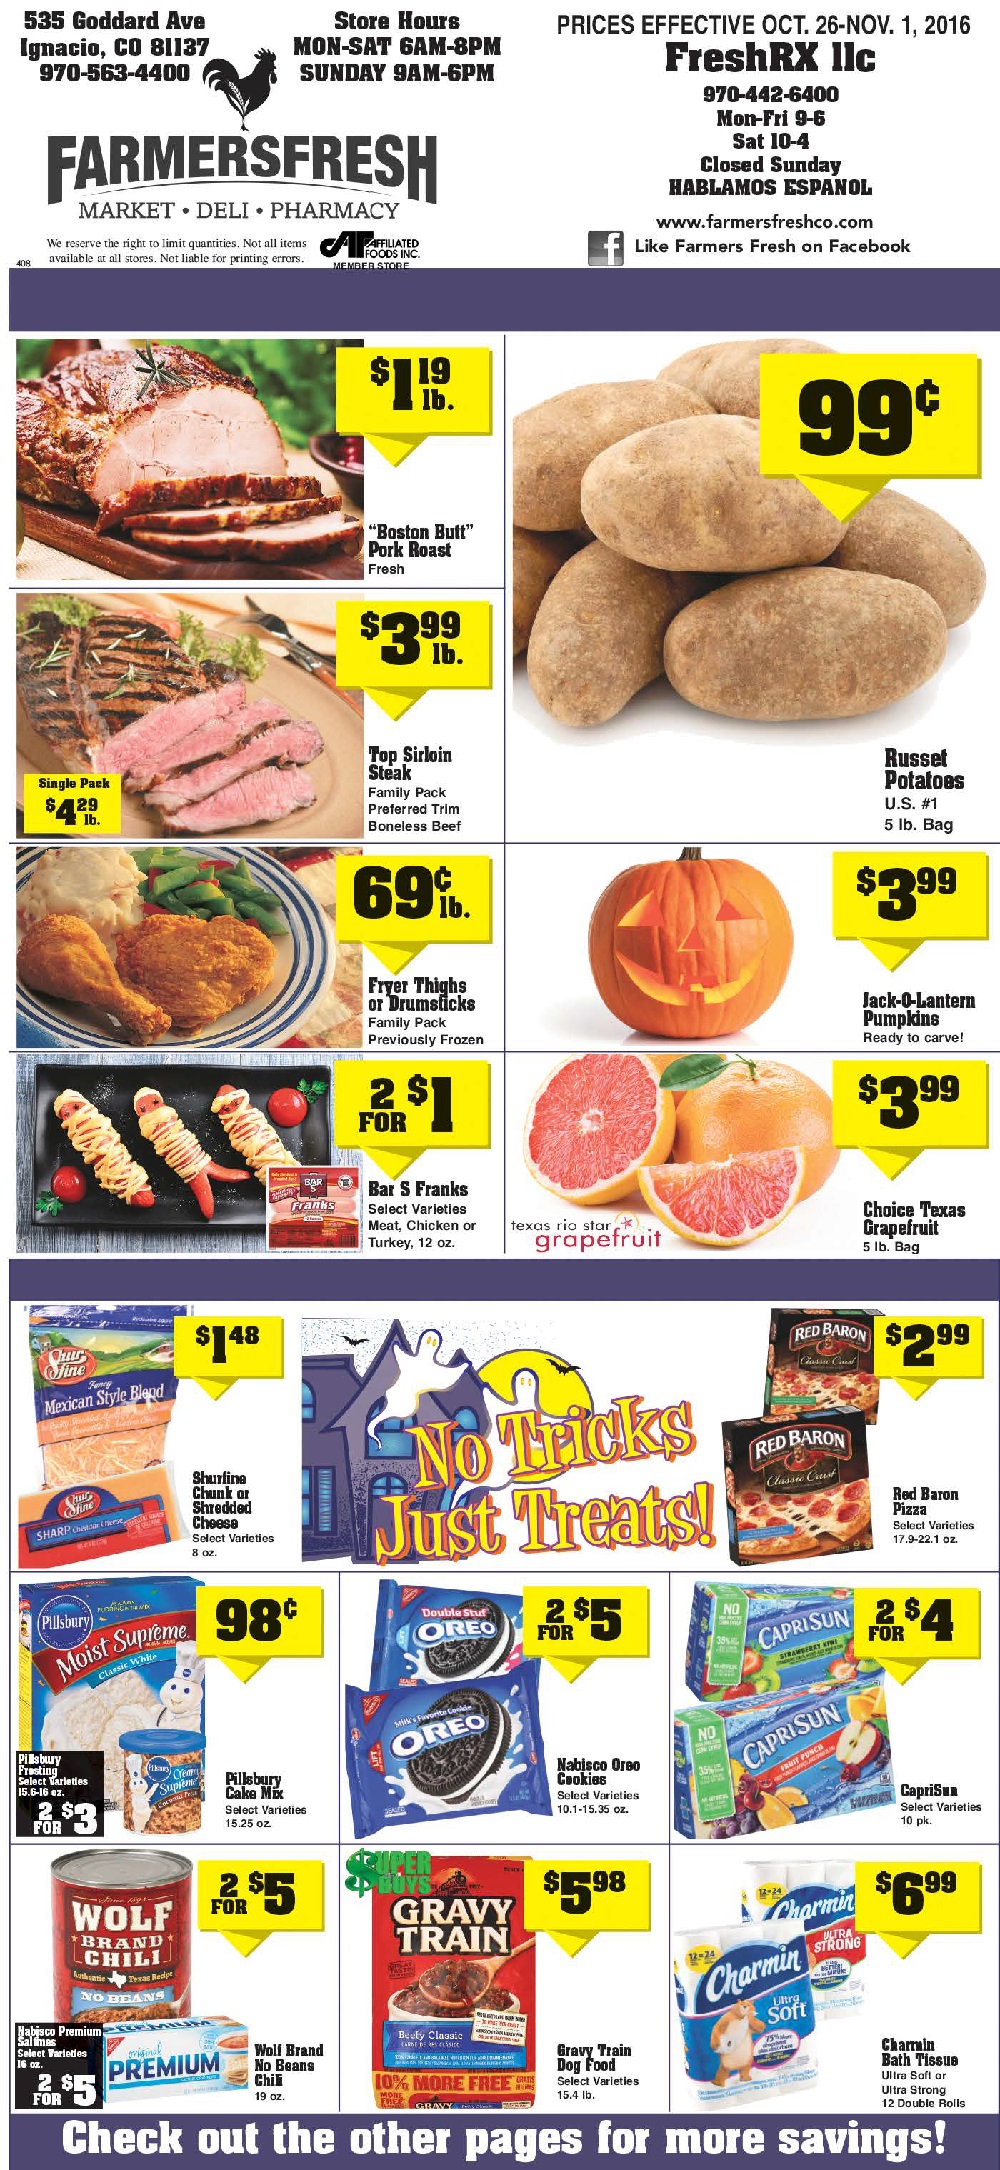 weekly-sales-for-oct-26th-nov-1st-pg1